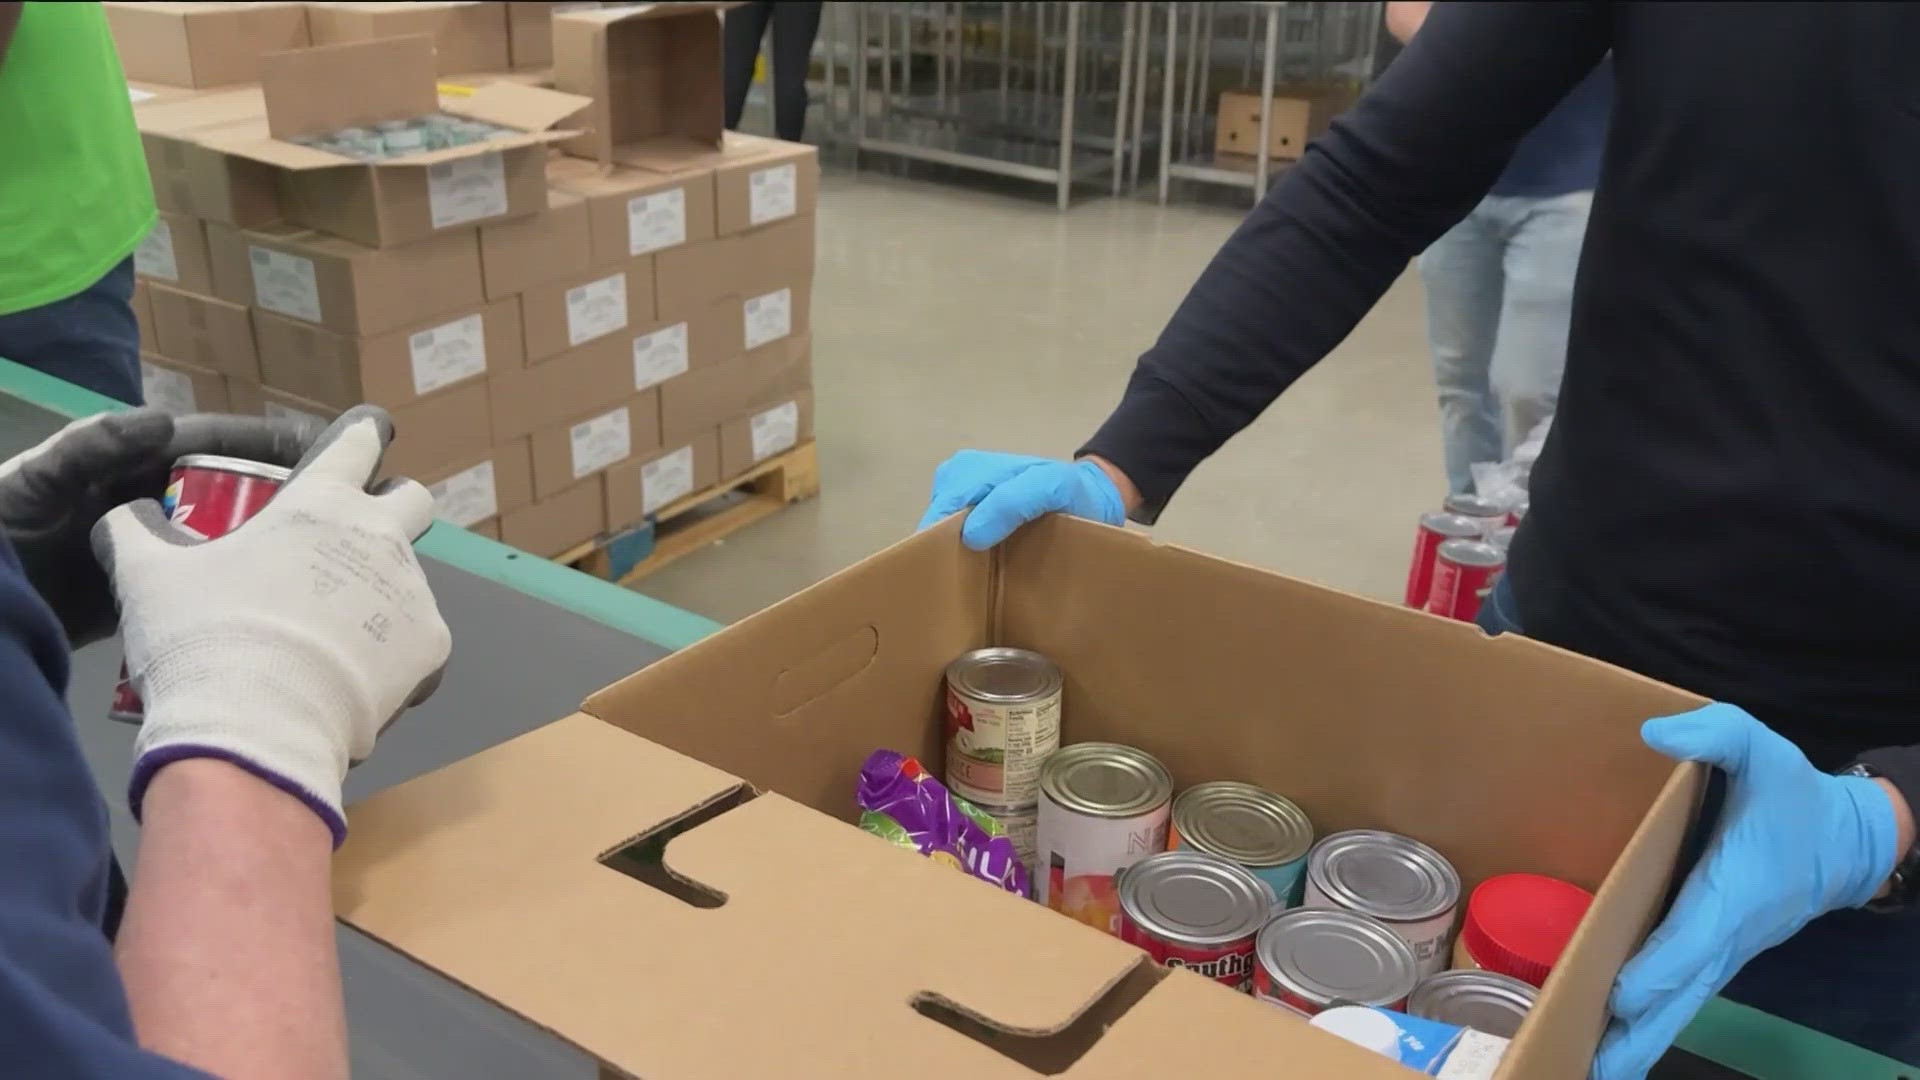 The food bank has been hosting distribution events ahead of the icy temperatures.